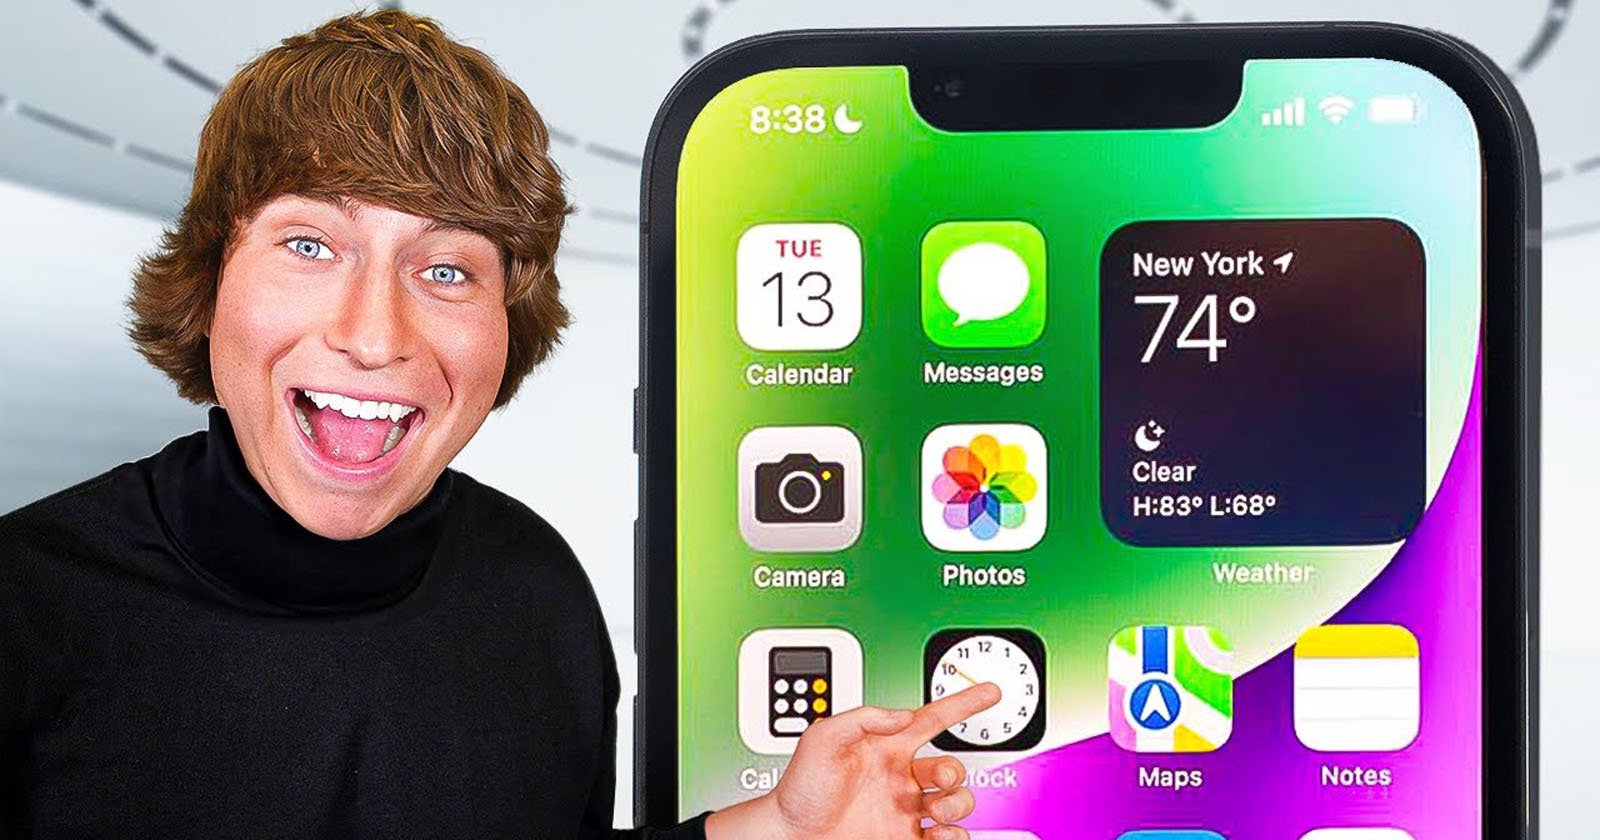  youtuber builds massive 7-foot tall fully functional iphone 